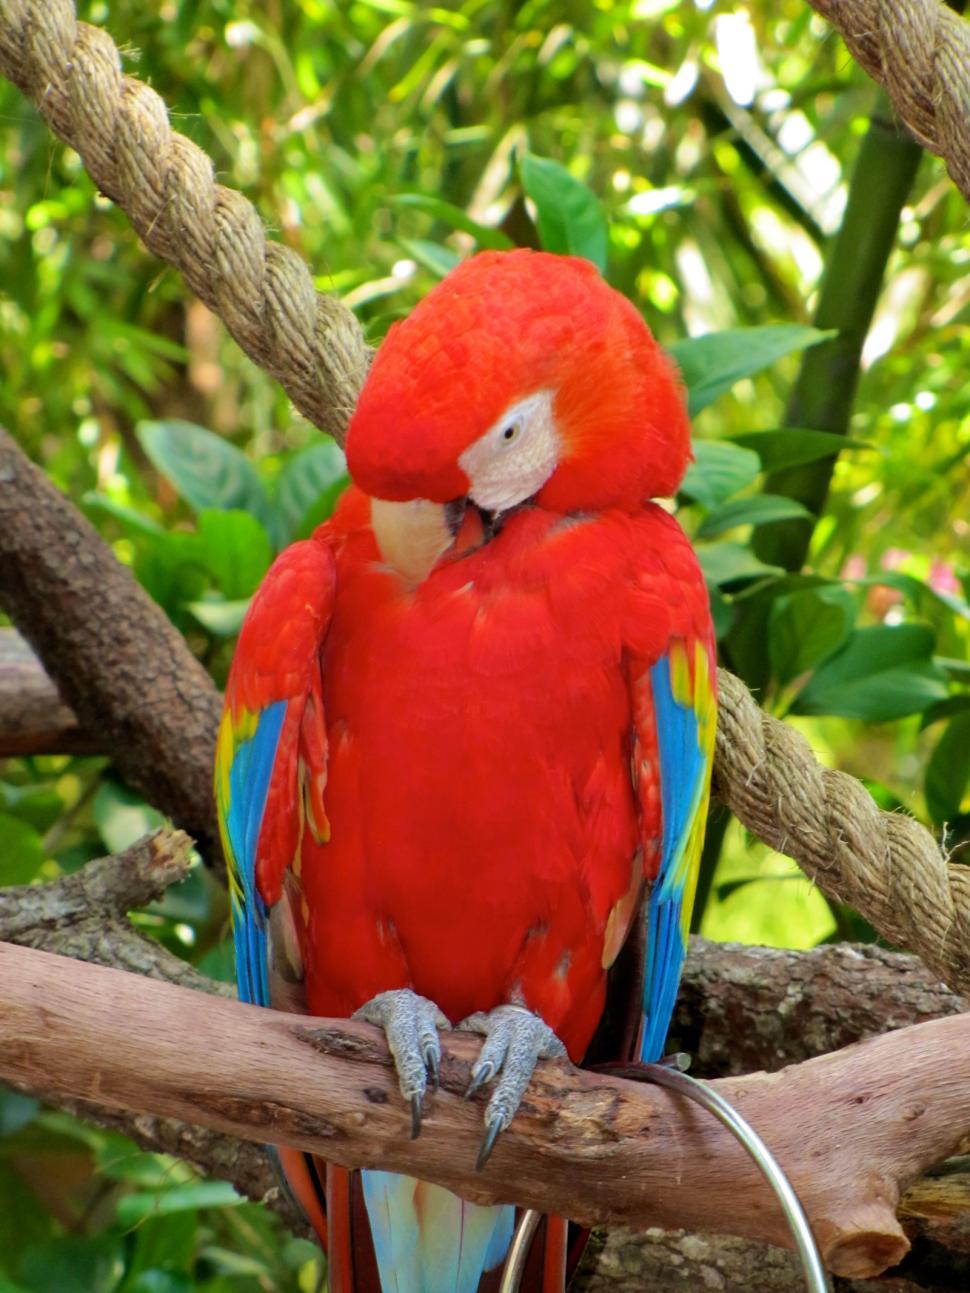 Free Image of Red Parrot Sitting on Top of a Tree Branch 